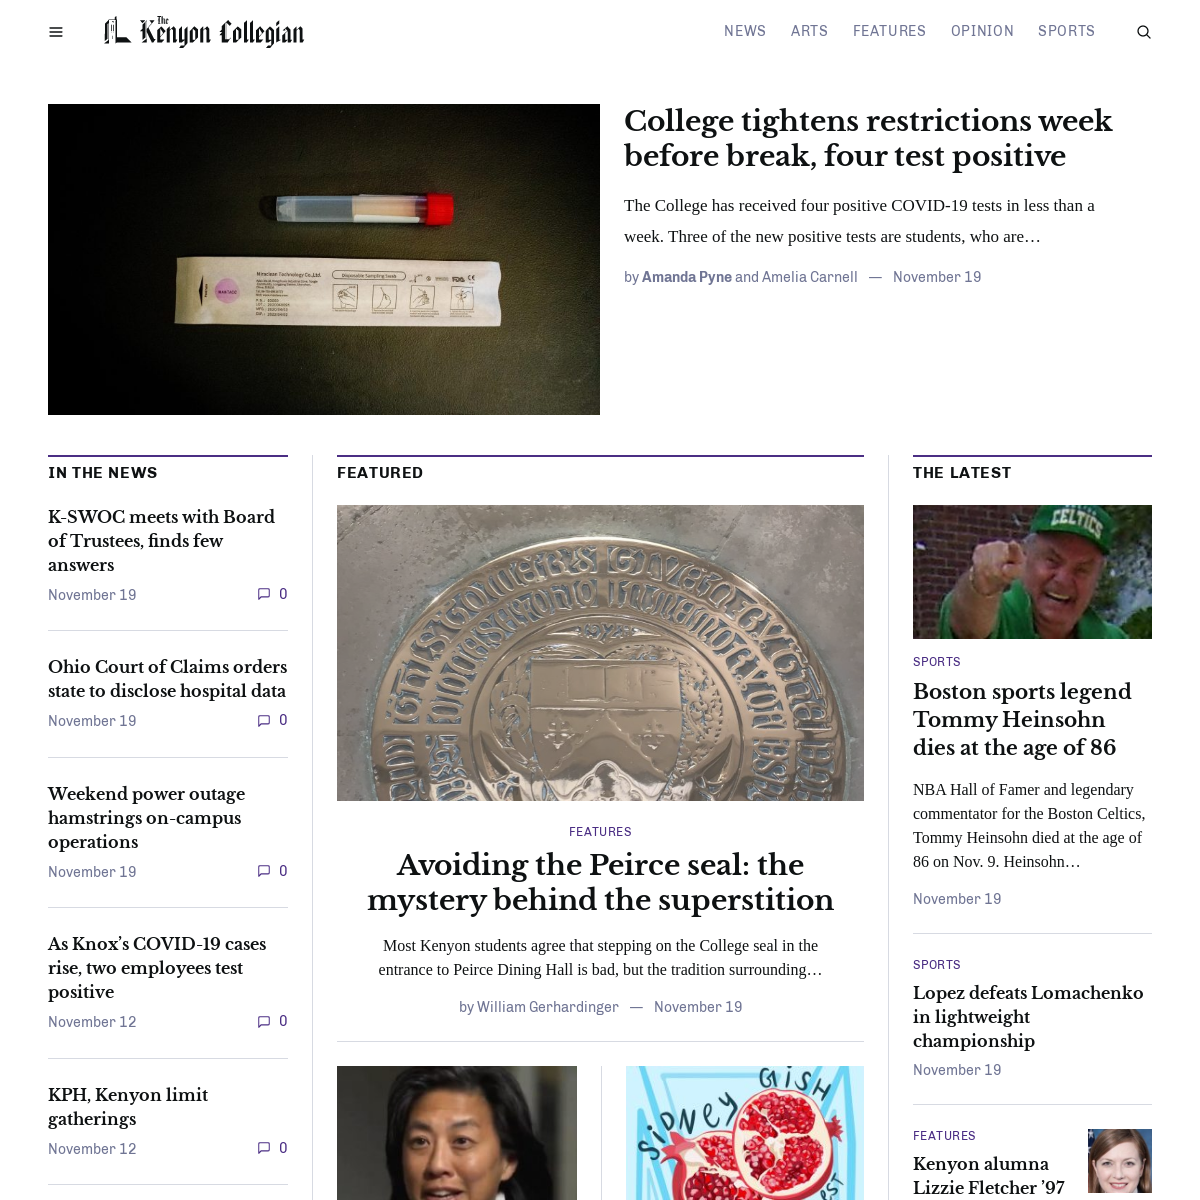 A complete backup of kenyoncollegian.com